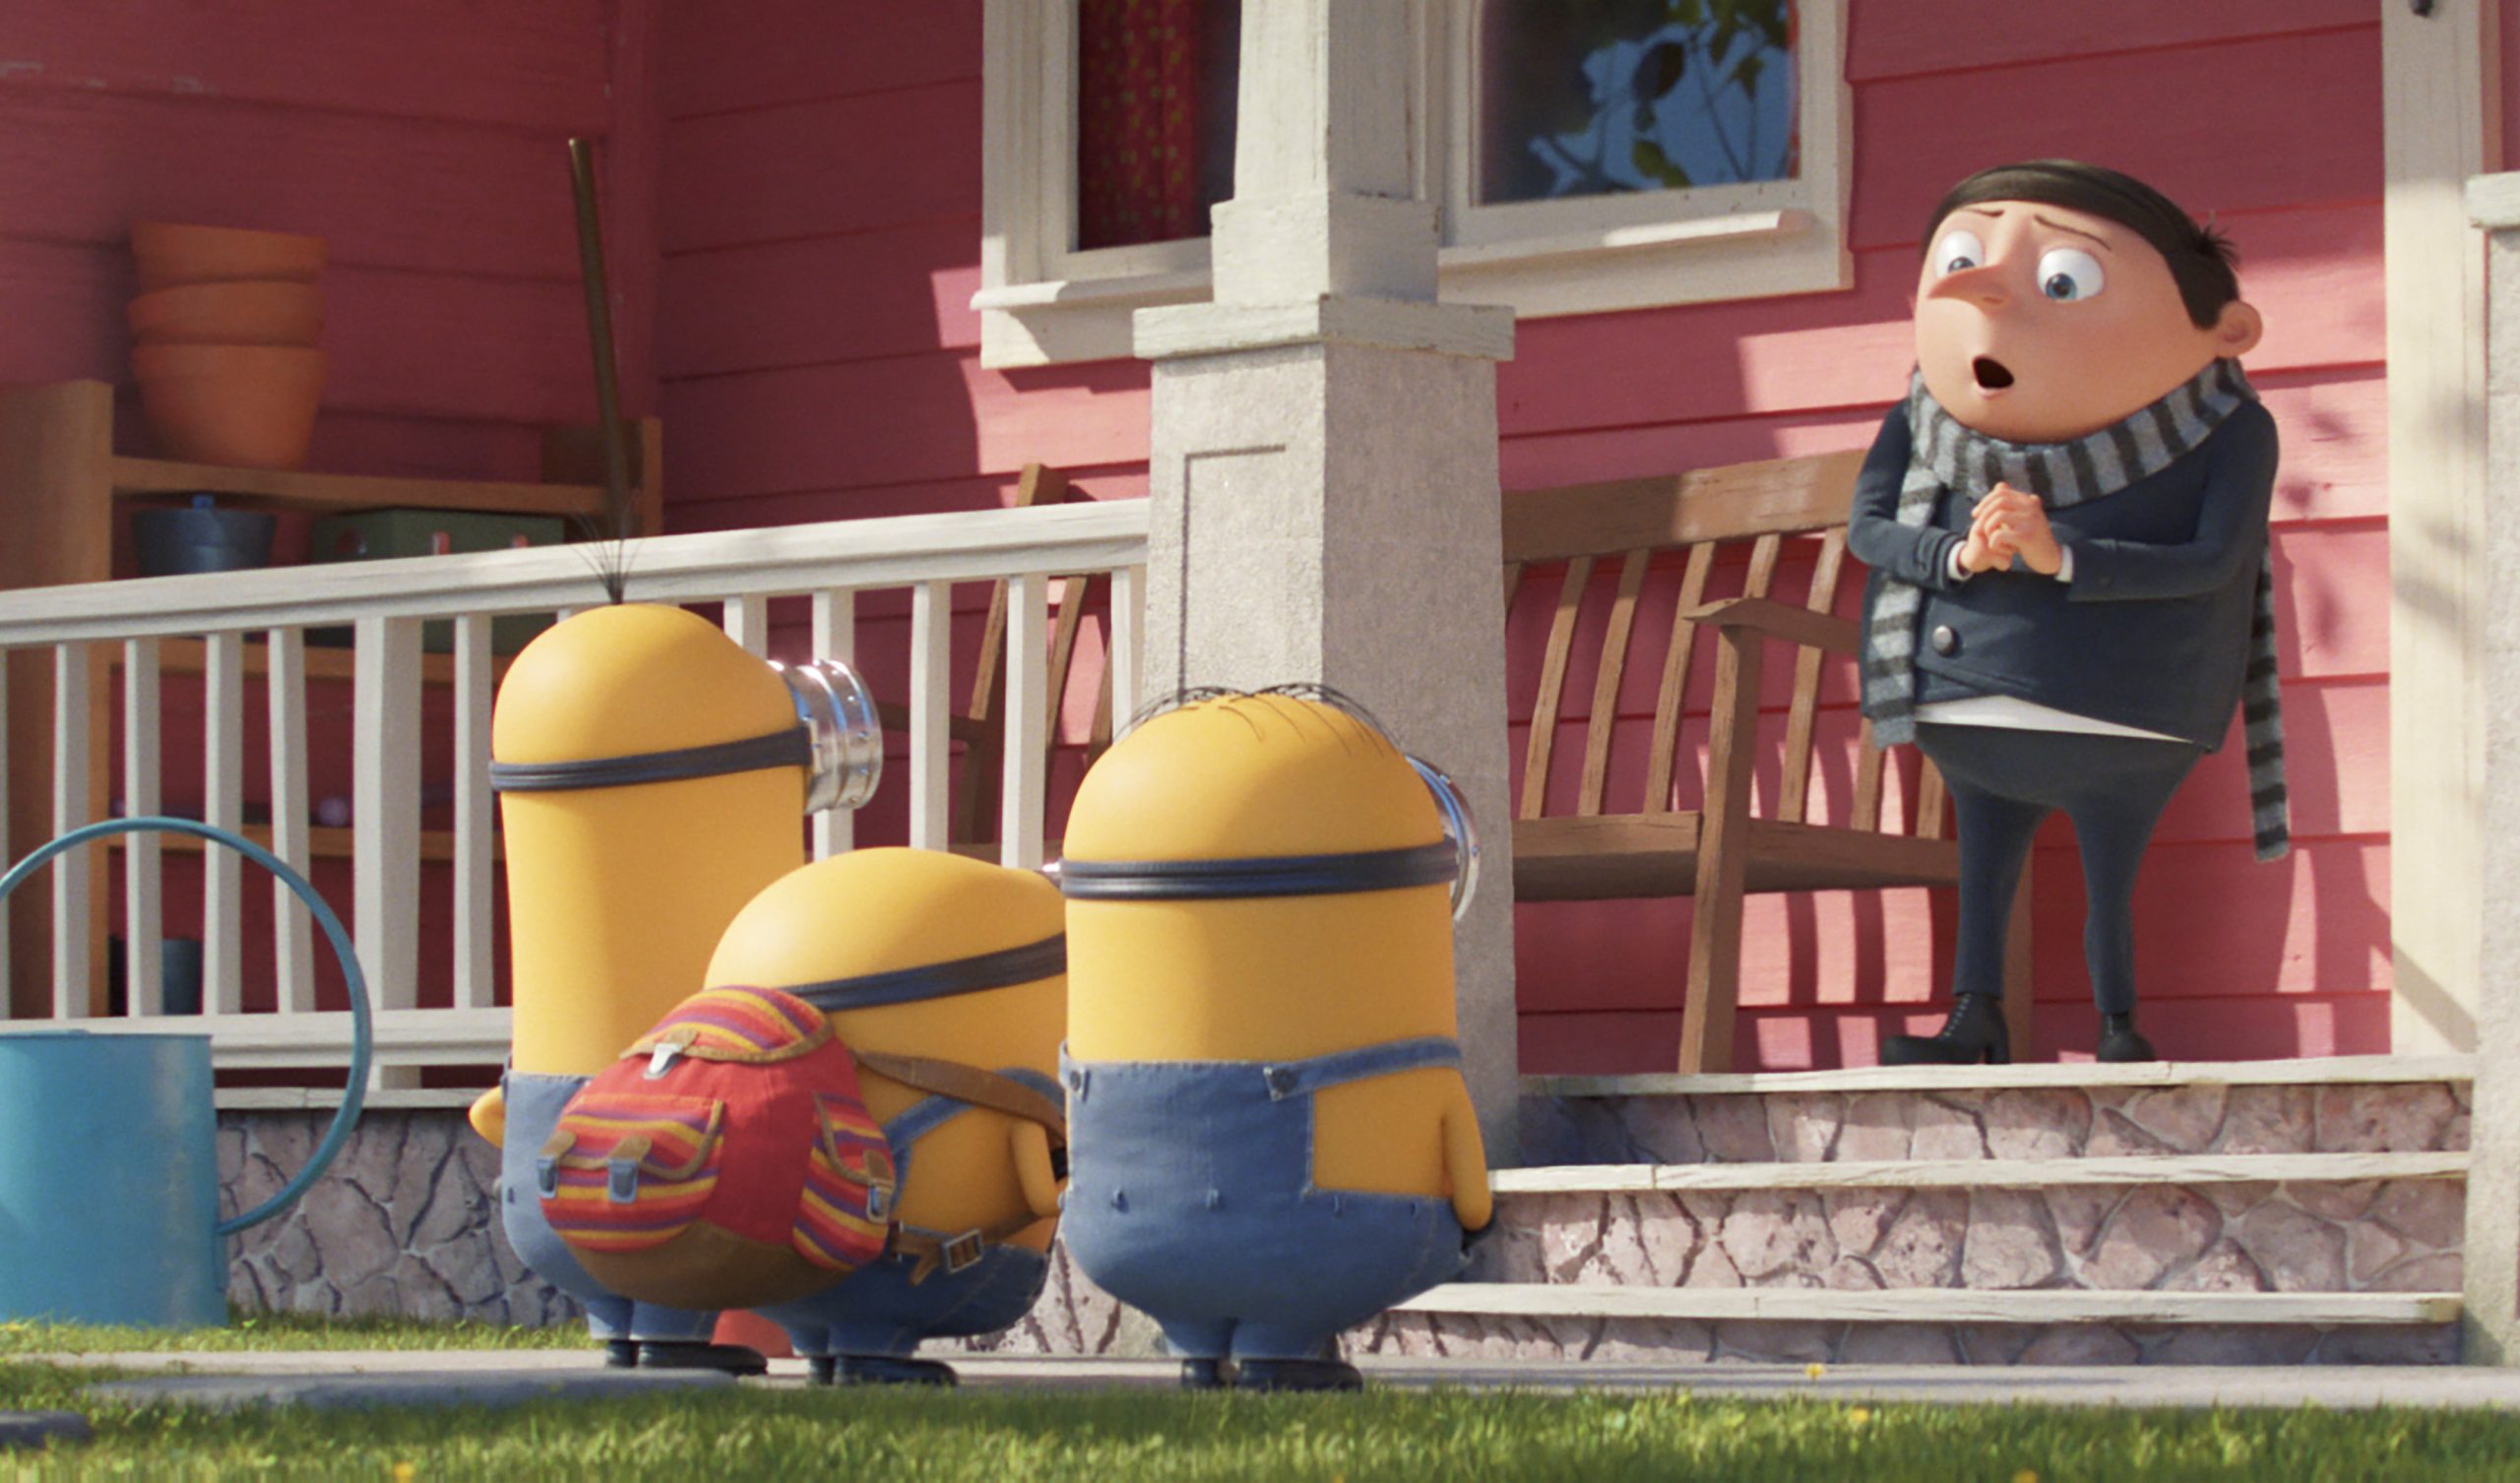 Minions: The Rise of Gru Tops North American Box Office